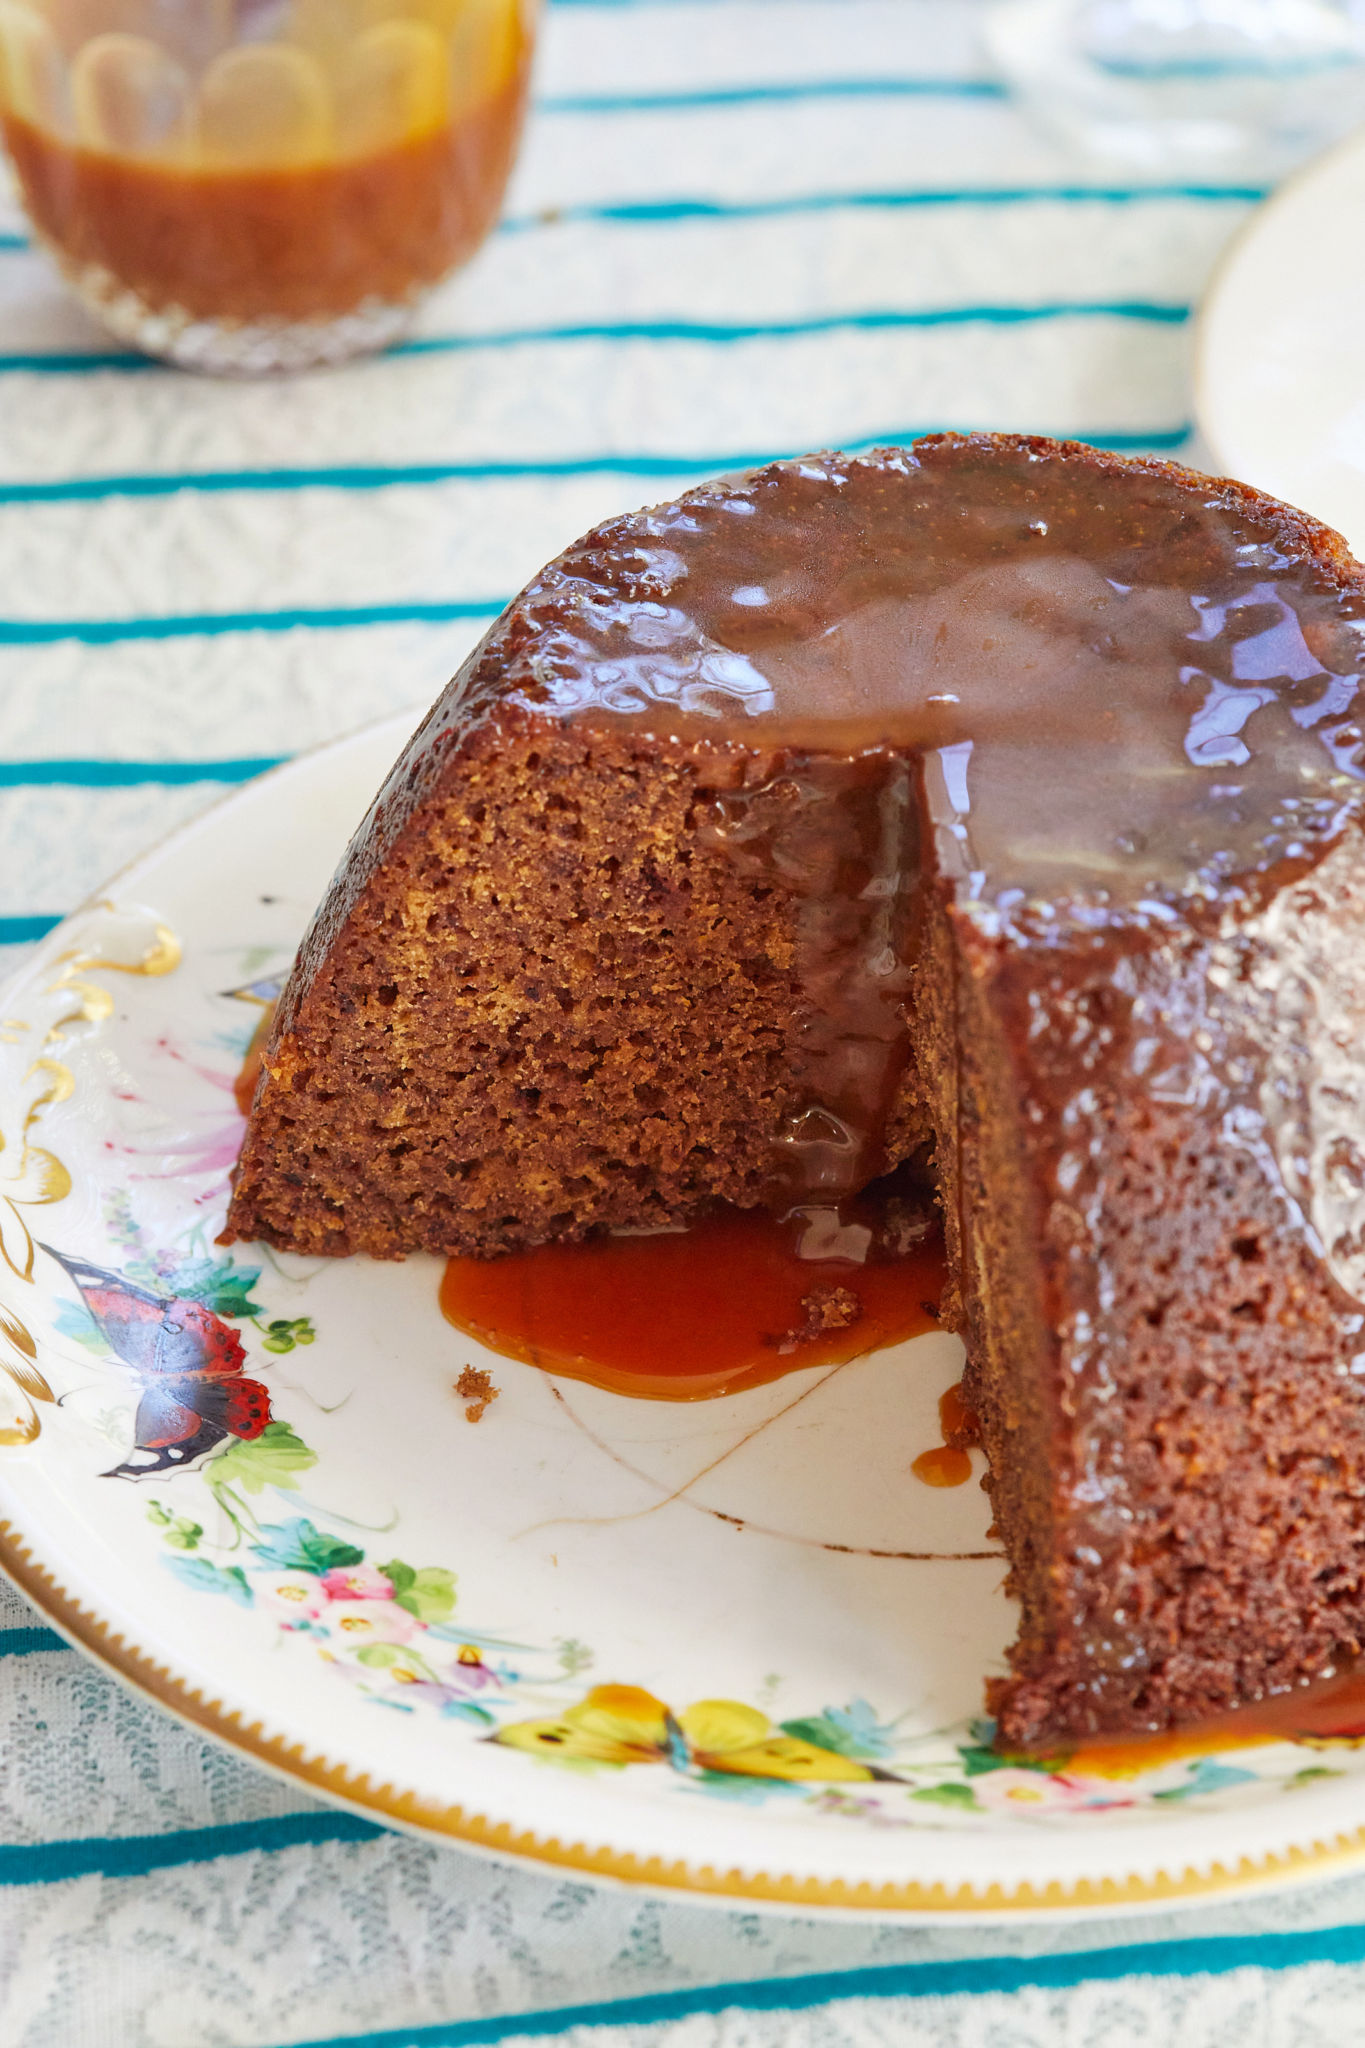 Sticky Toffee Pudding recipe dripping onto a plate, with a slice taken out to show texture and consistency.